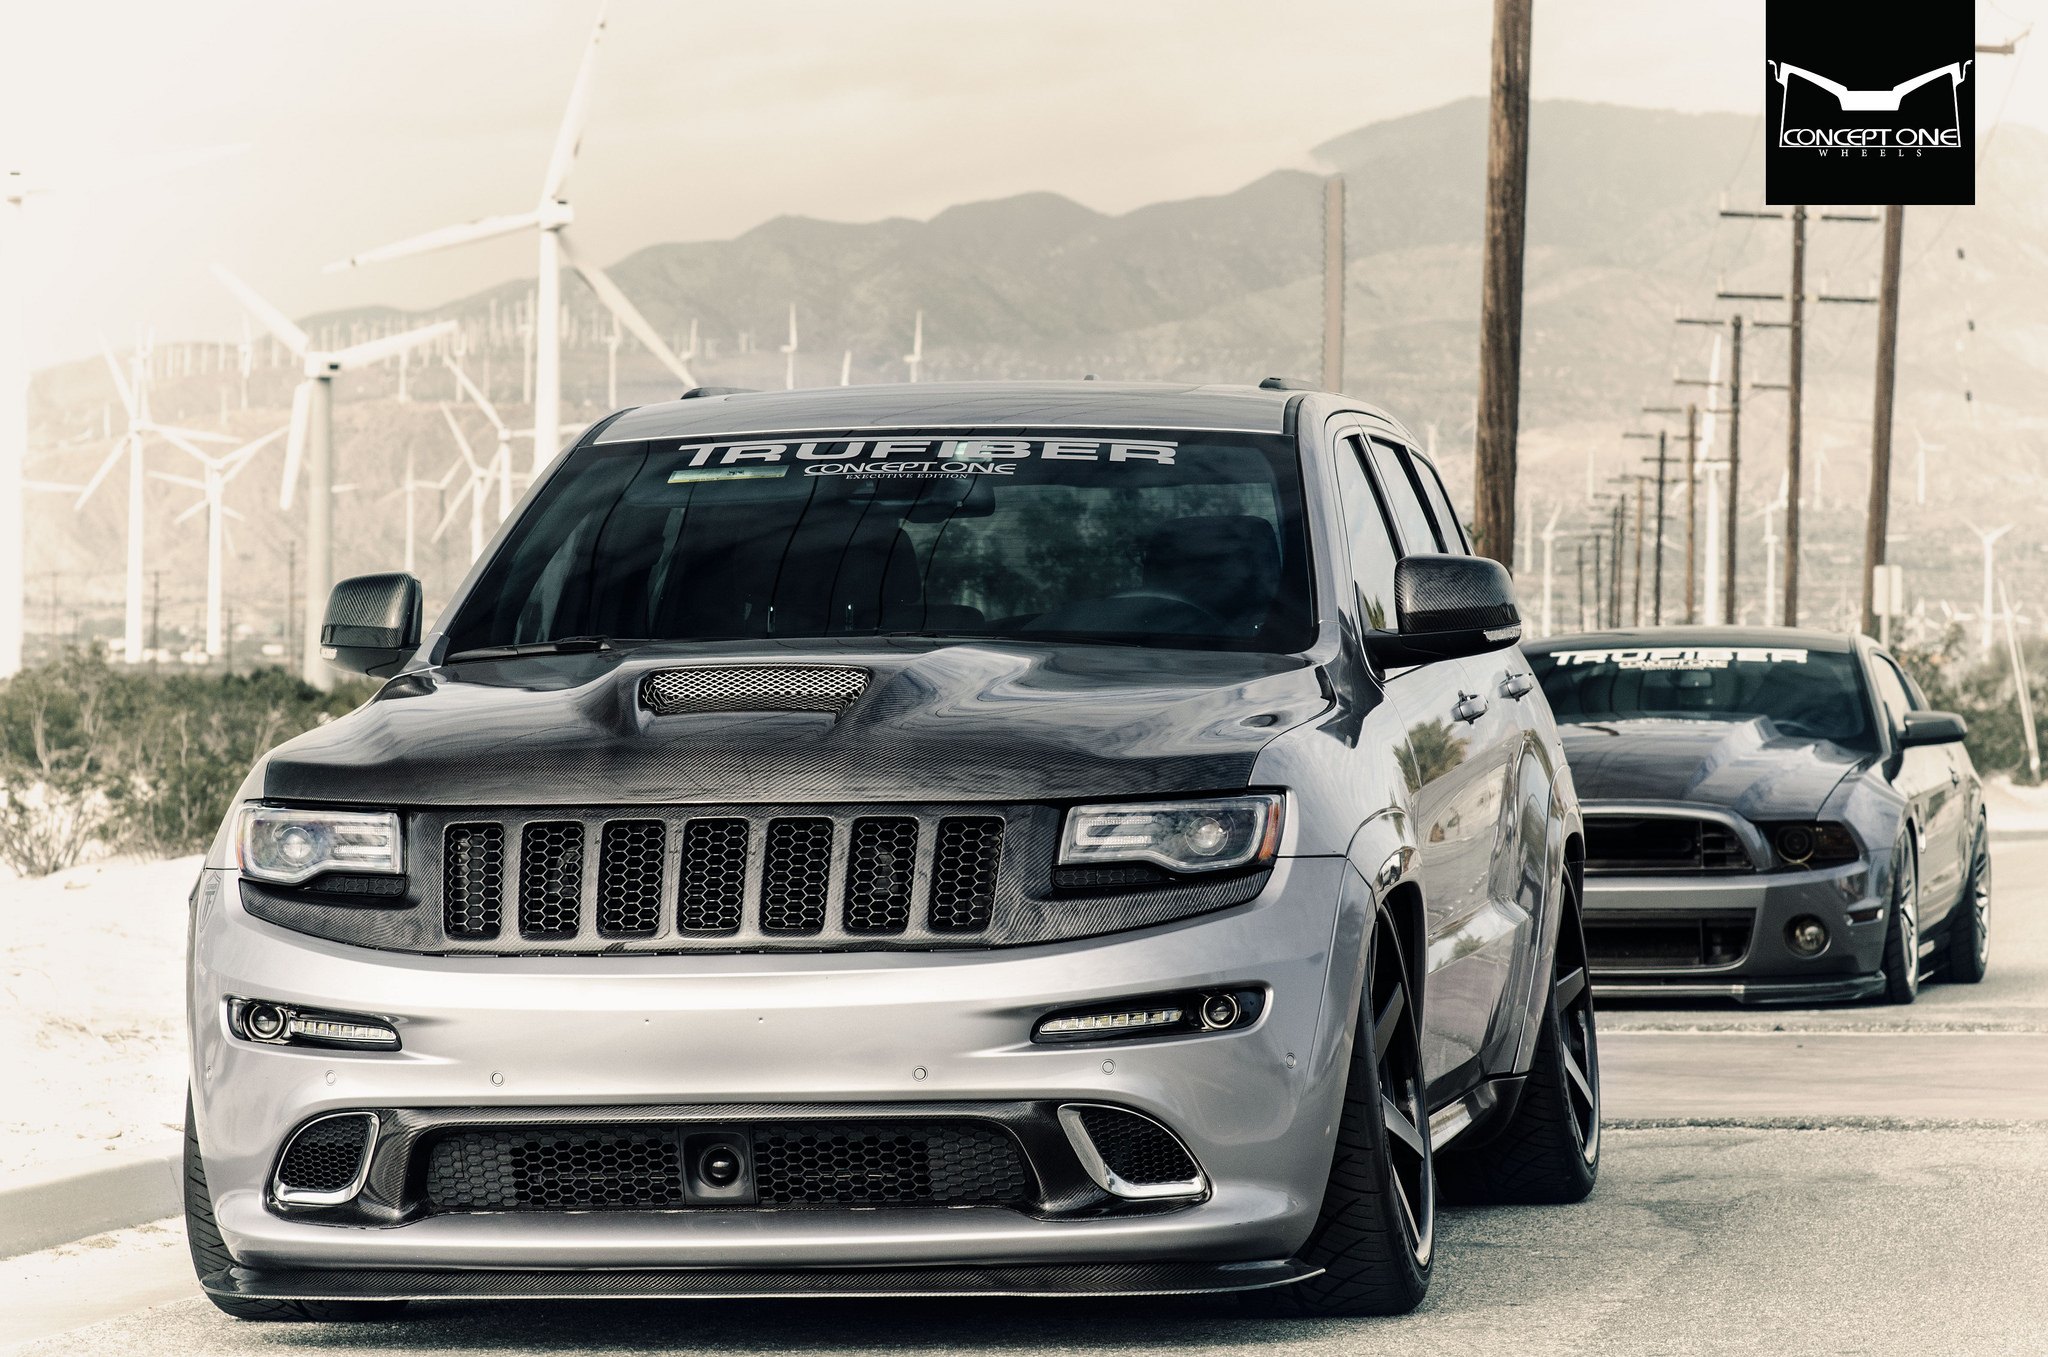 Carbon Fiber Ram Air Hood on Jeep Grand Cherokee SRT - Photo by Concept ONE